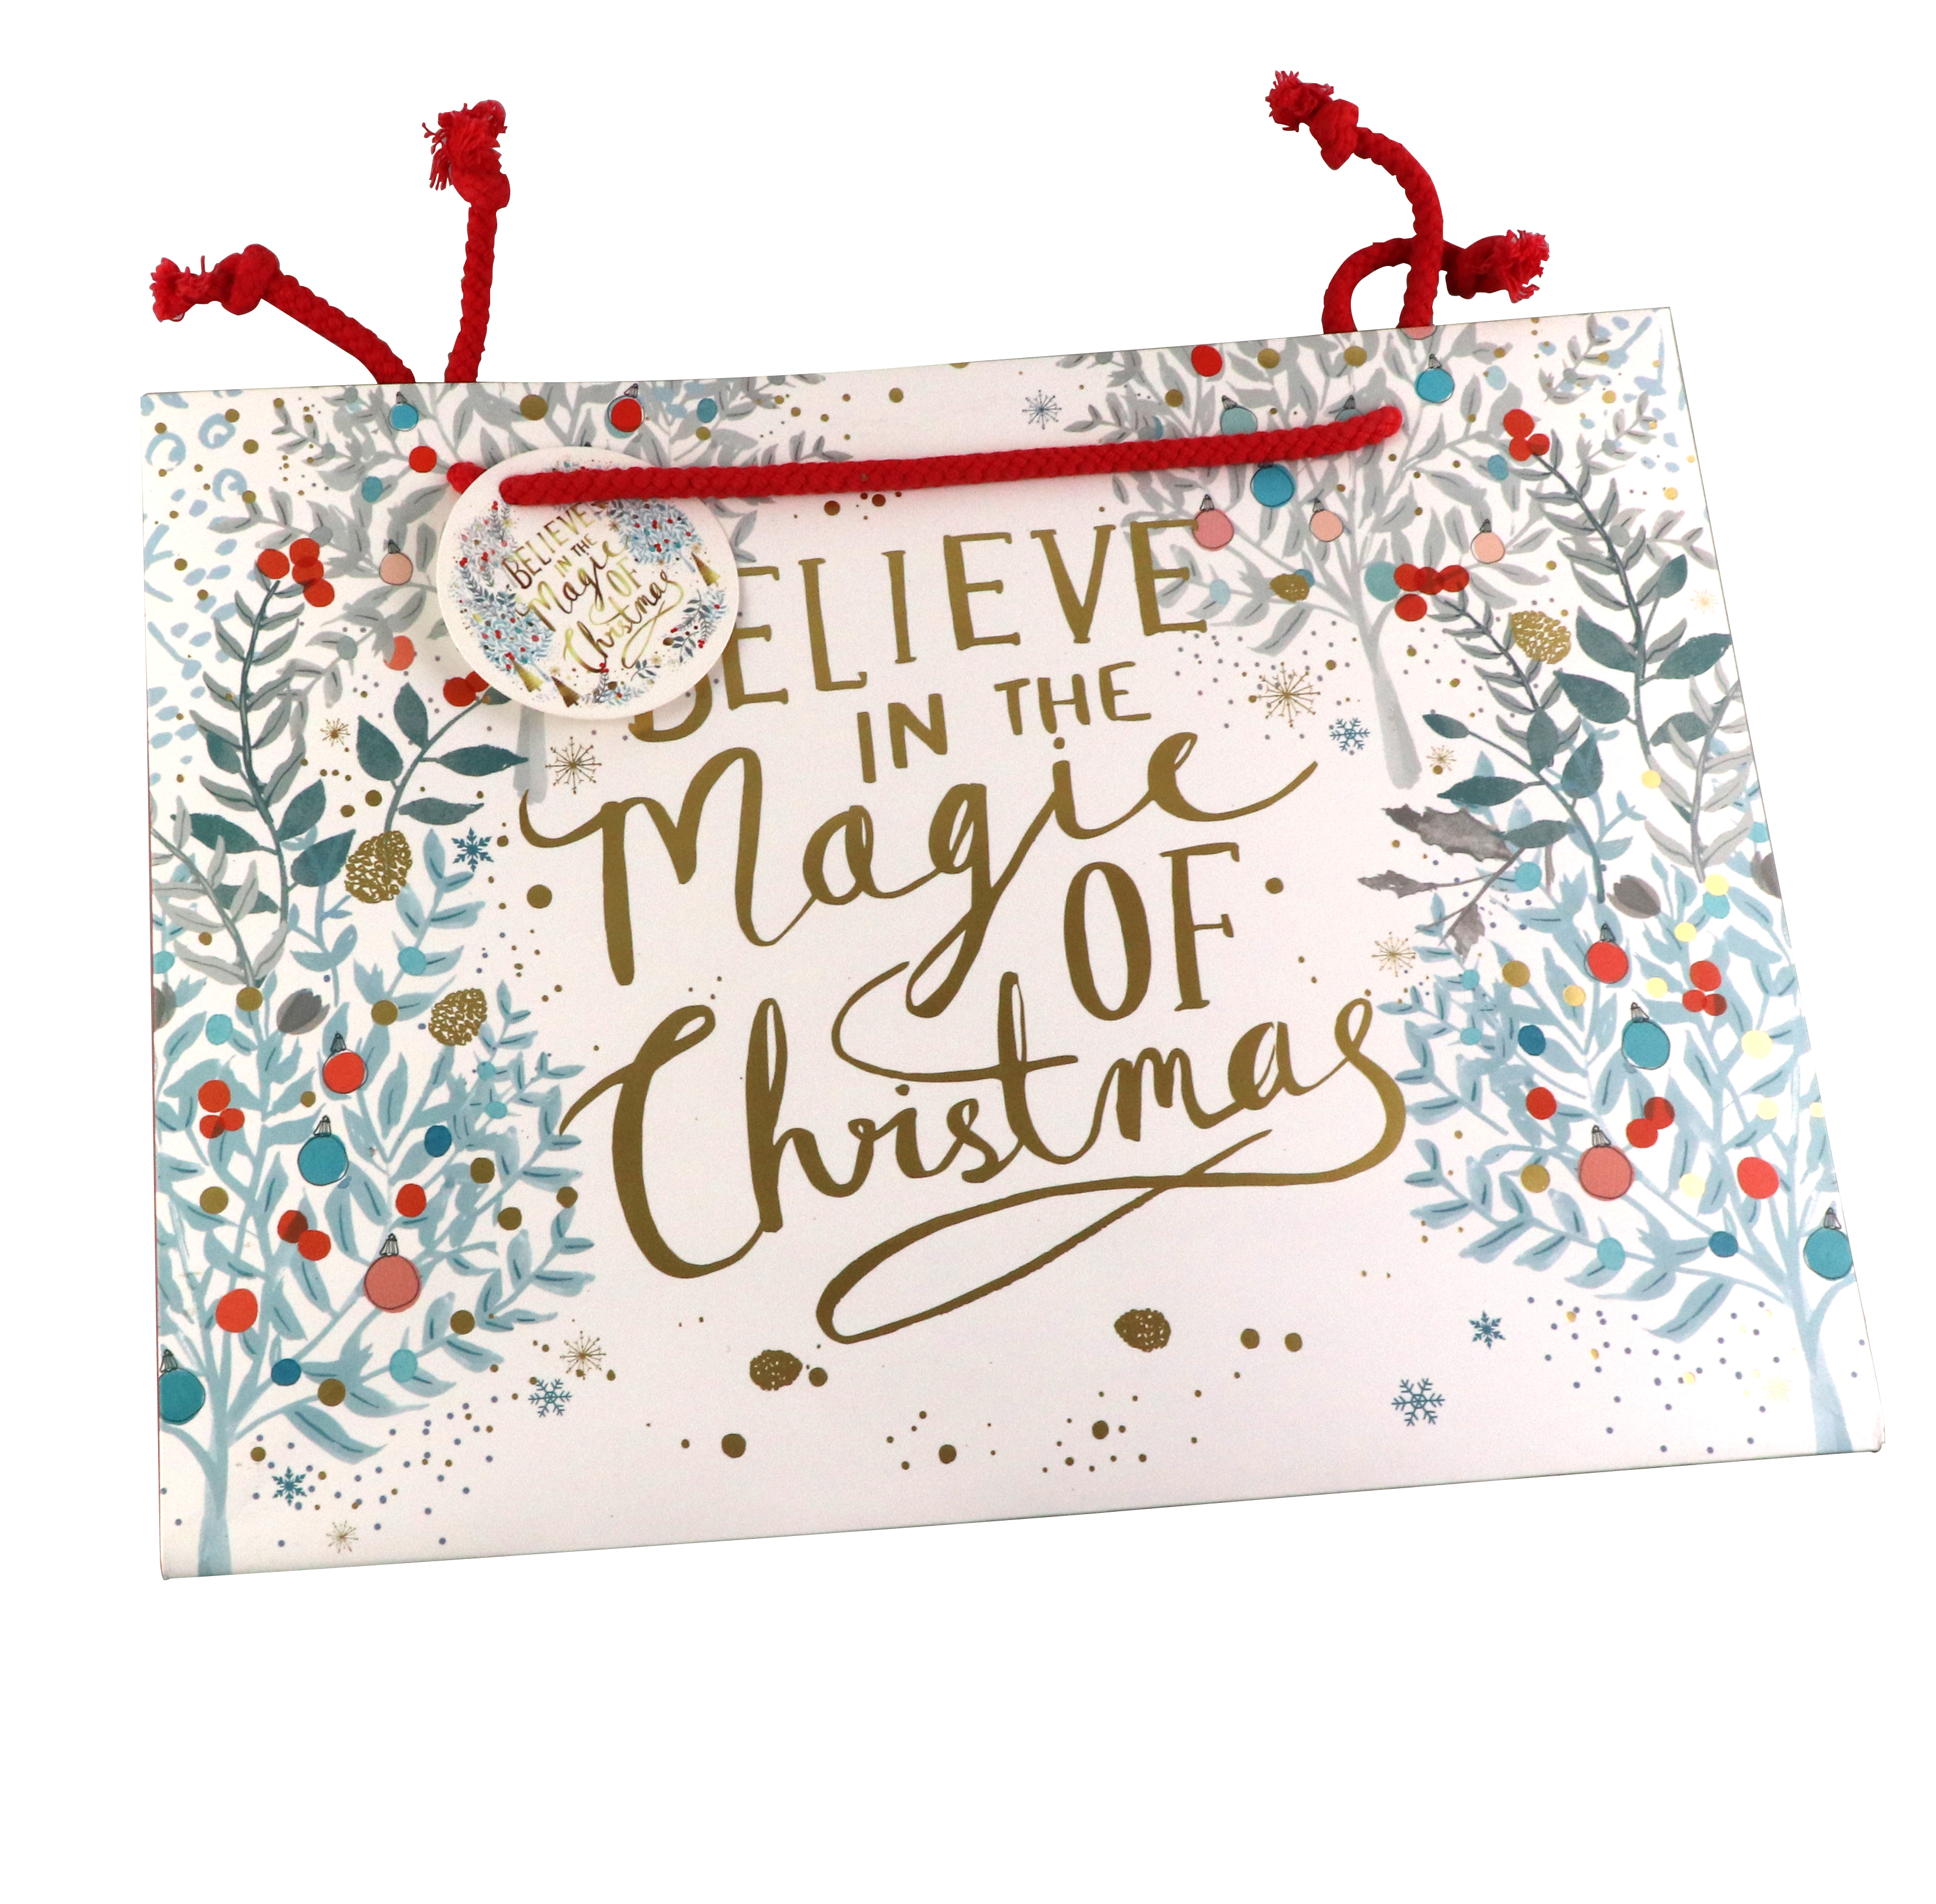  Punga cadou - Belive in the magic of Christmas | Swan Mill Paper 